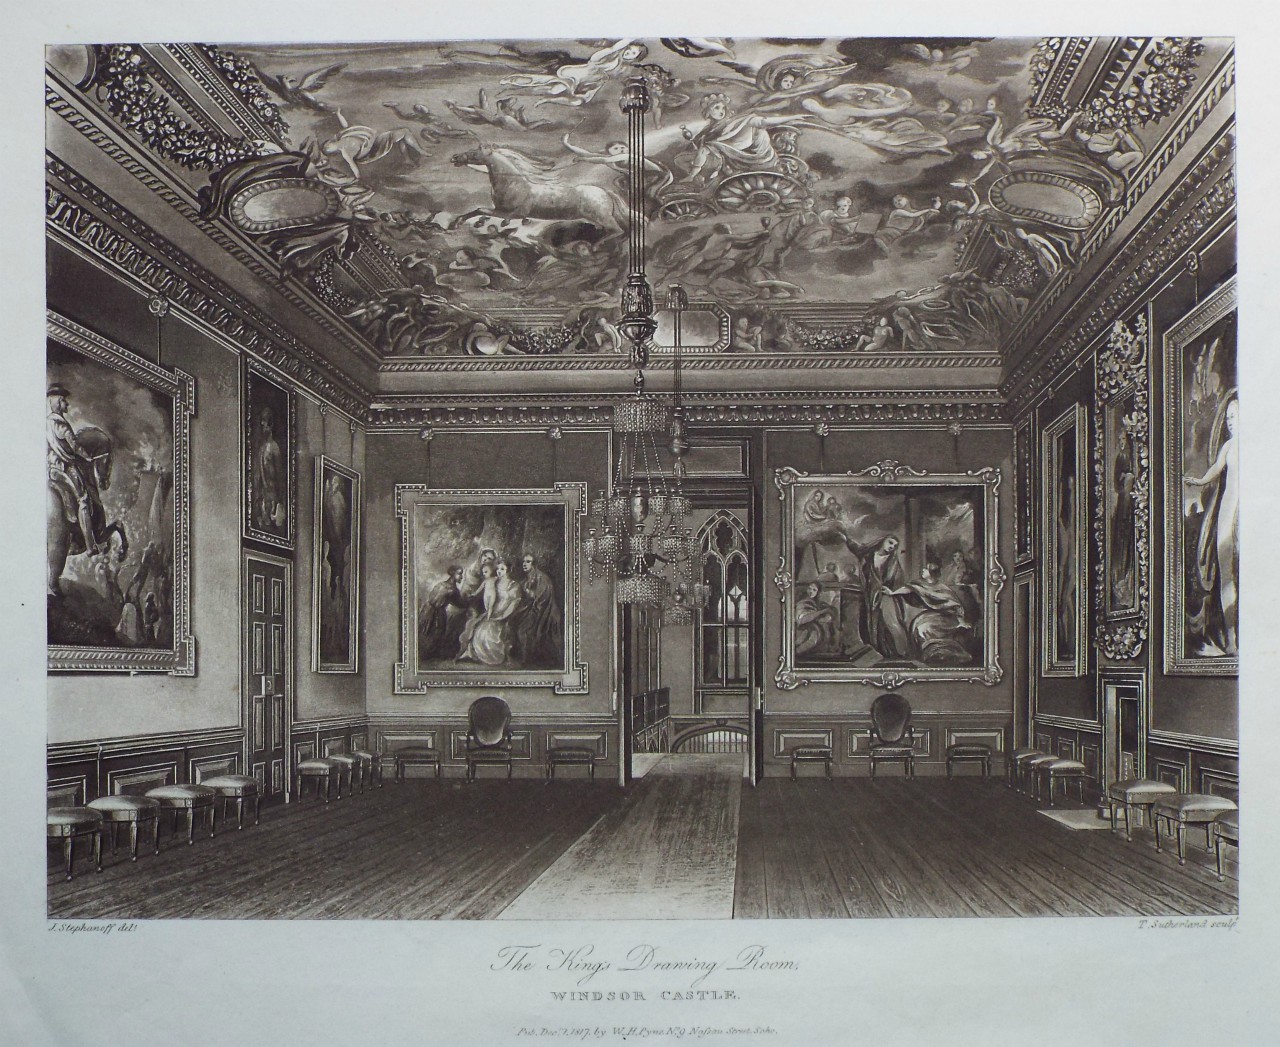 Aquatint - The King's Drawing Room, Windsor Castle. - Sutherland